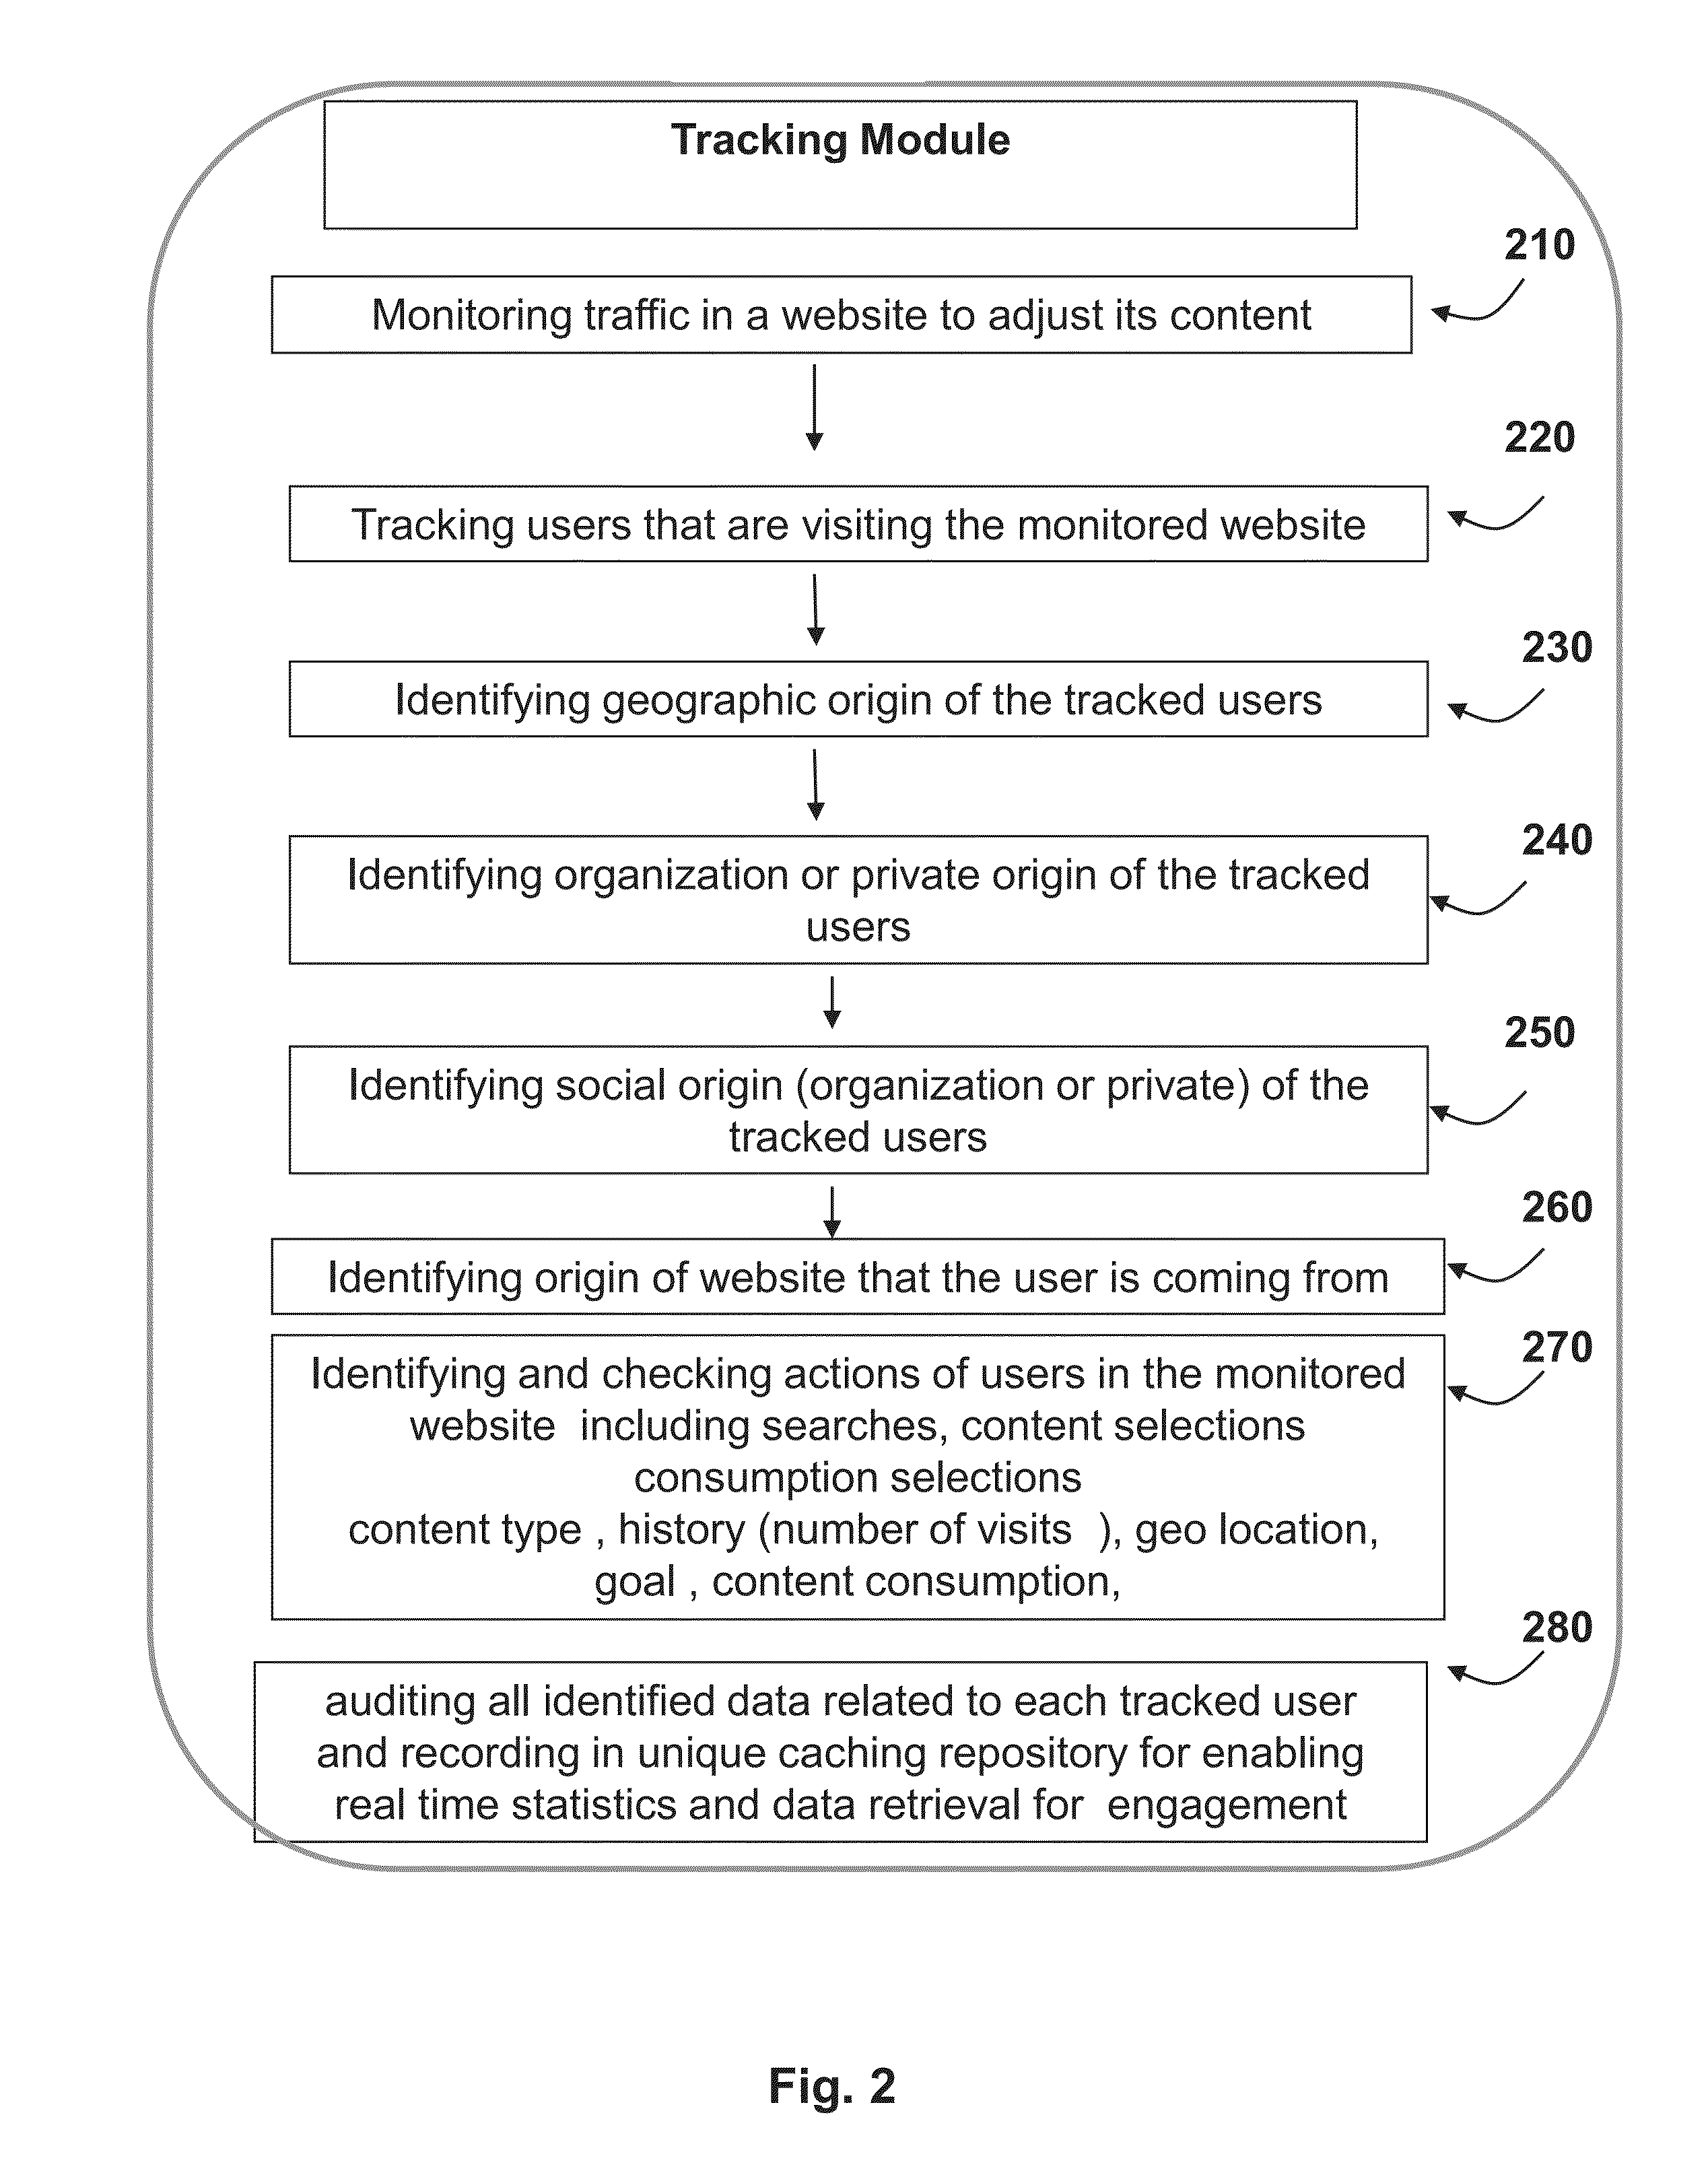 Method and system for predictive marketing campigns based on users online behavior and profile